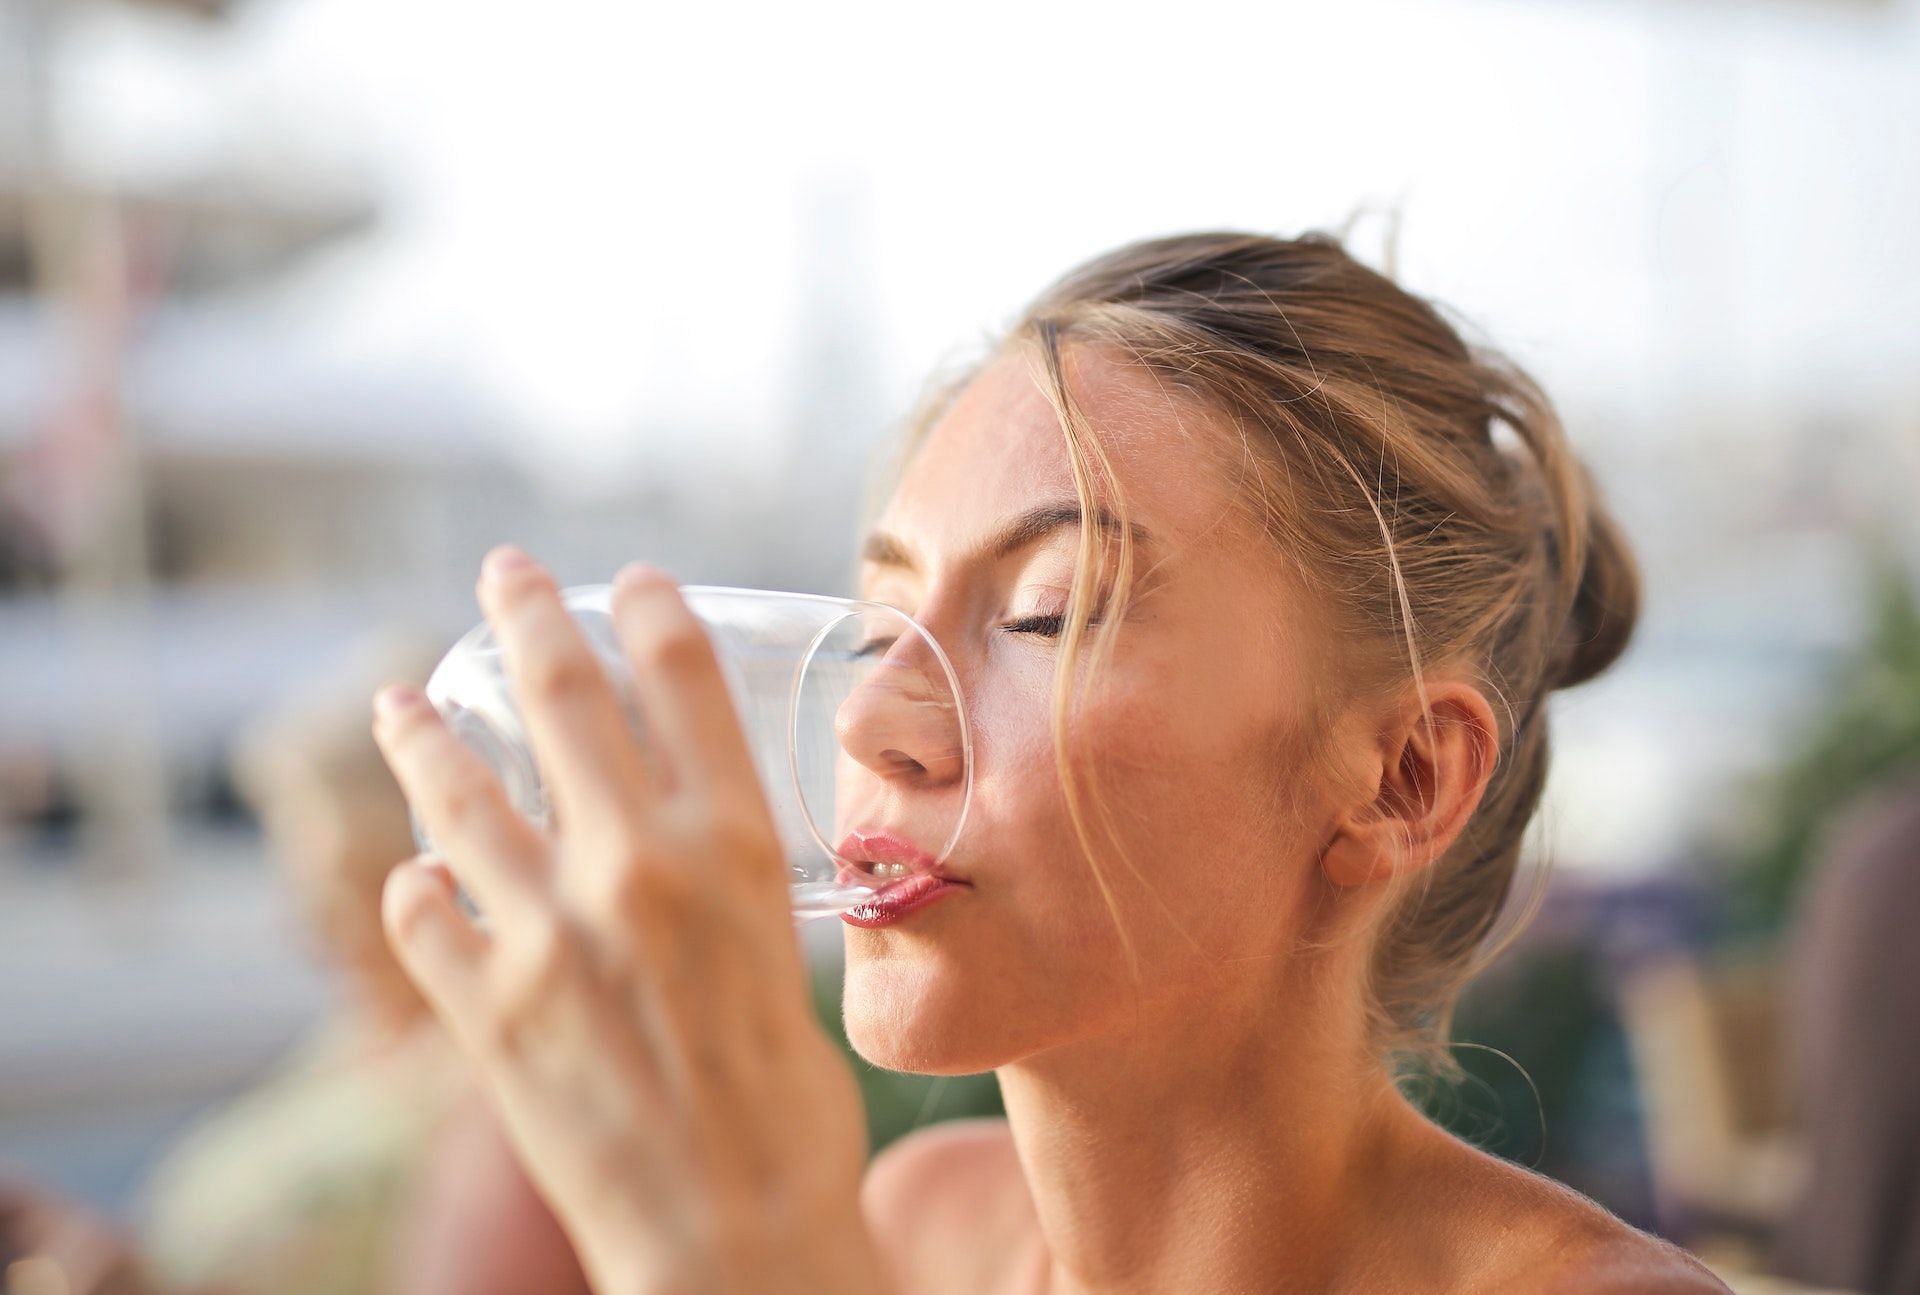 Stay hydrated to prevent dry eyes in the morning. (Image via Pexels/Adrienn)